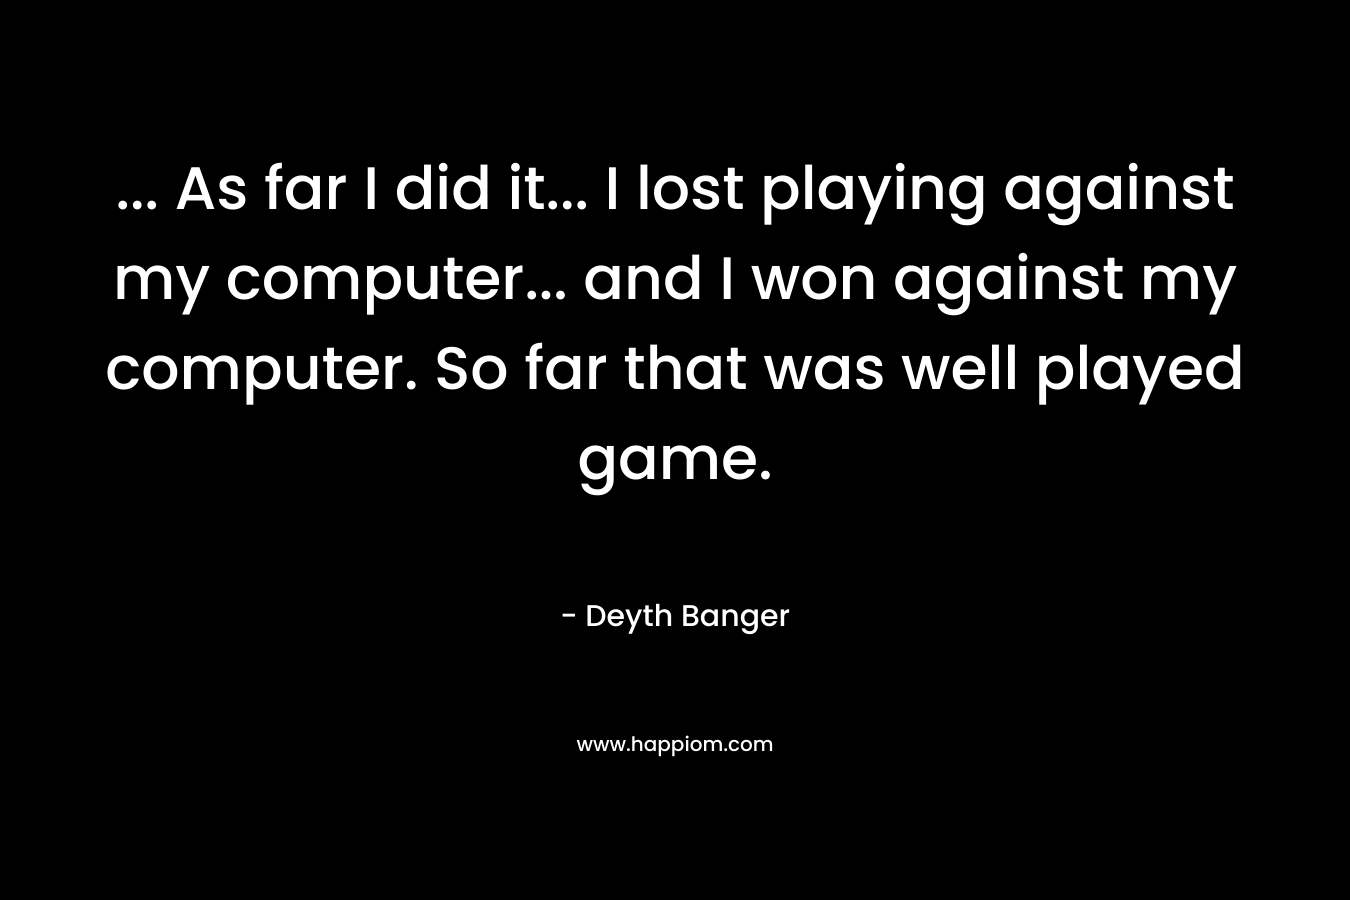 … As far I did it… I lost playing against my computer… and I won against my computer. So far that was well played game. – Deyth Banger